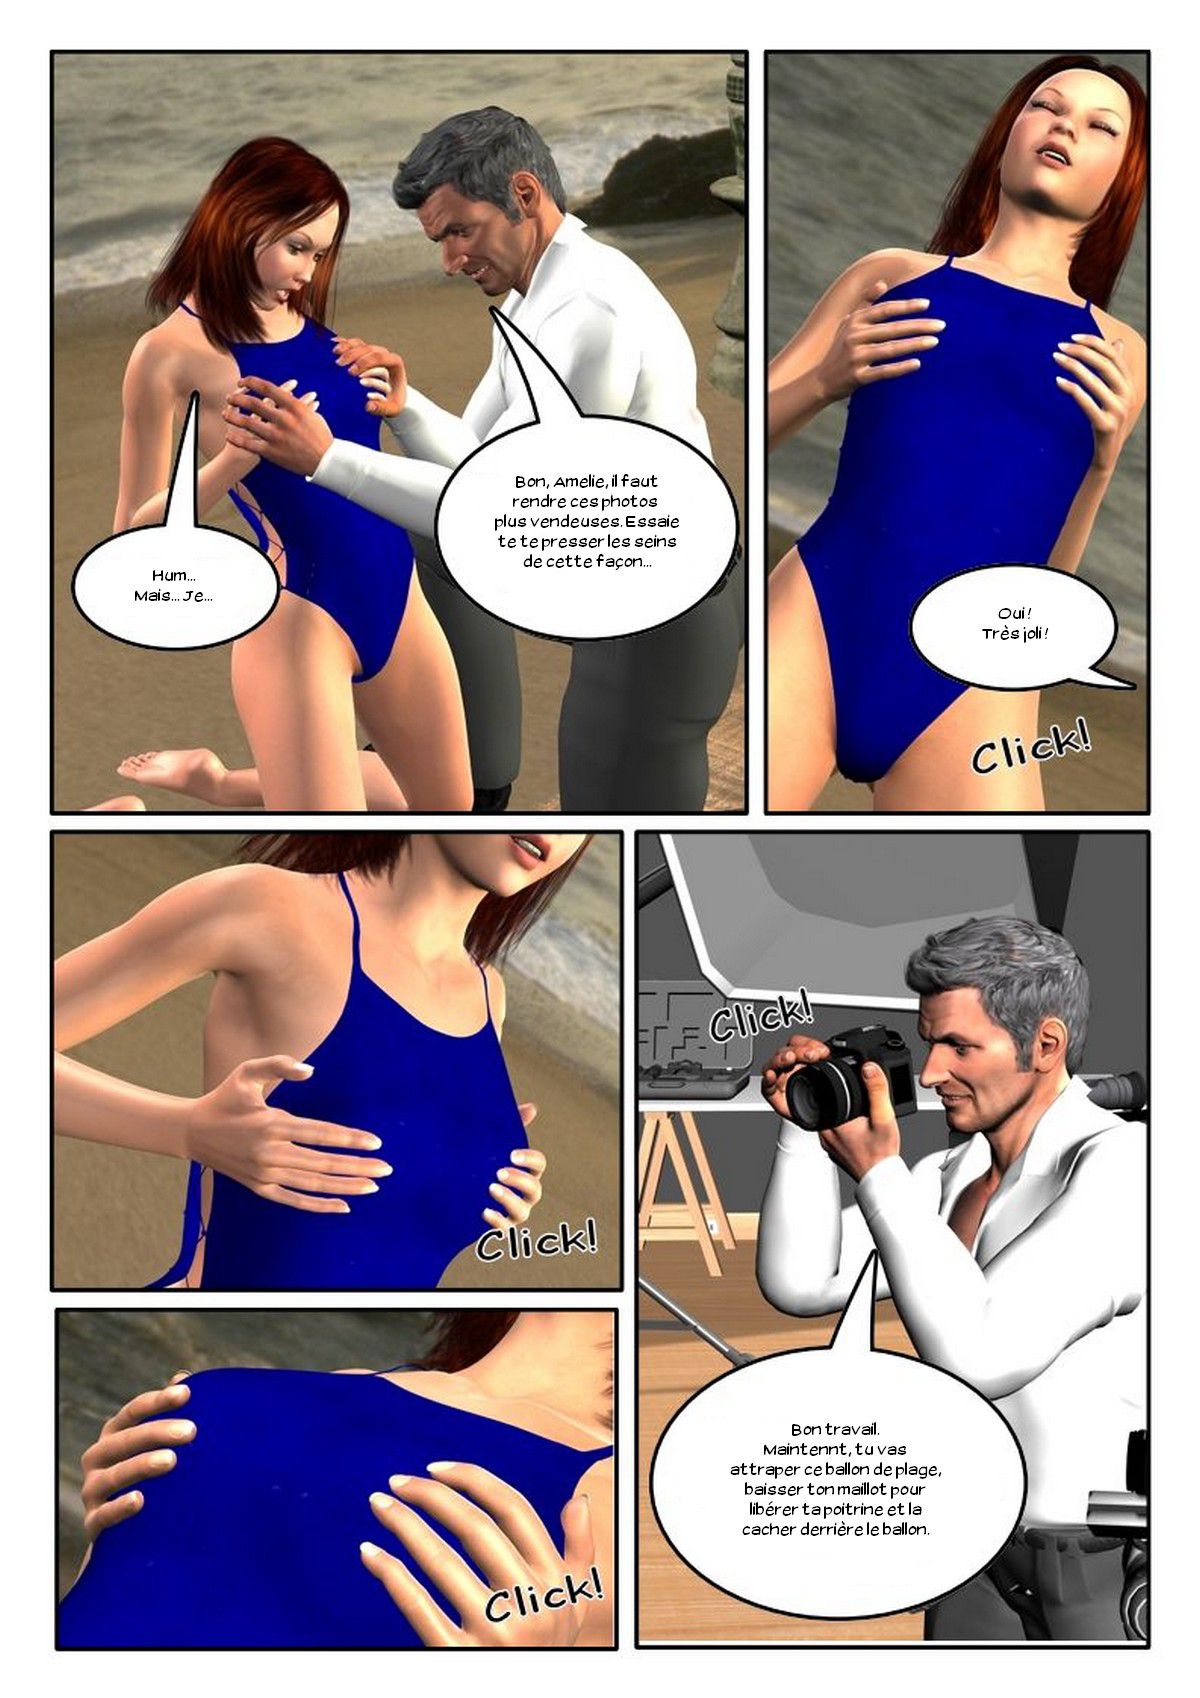 [Goblinboy] The Photoshoot (Complete) [French][Zer0] 34